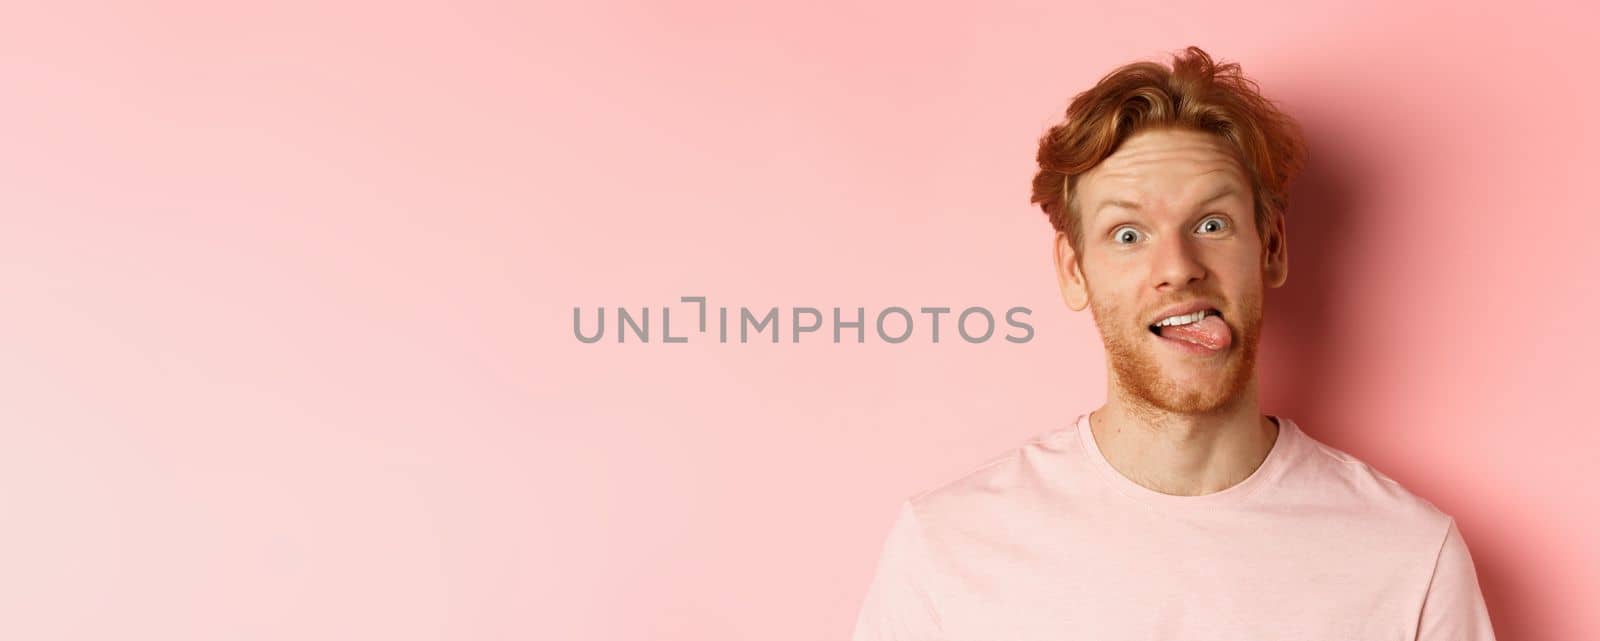 Headshot of funny redhead guy showing tongue, making silly faces at camera, standing joyful against pink background.